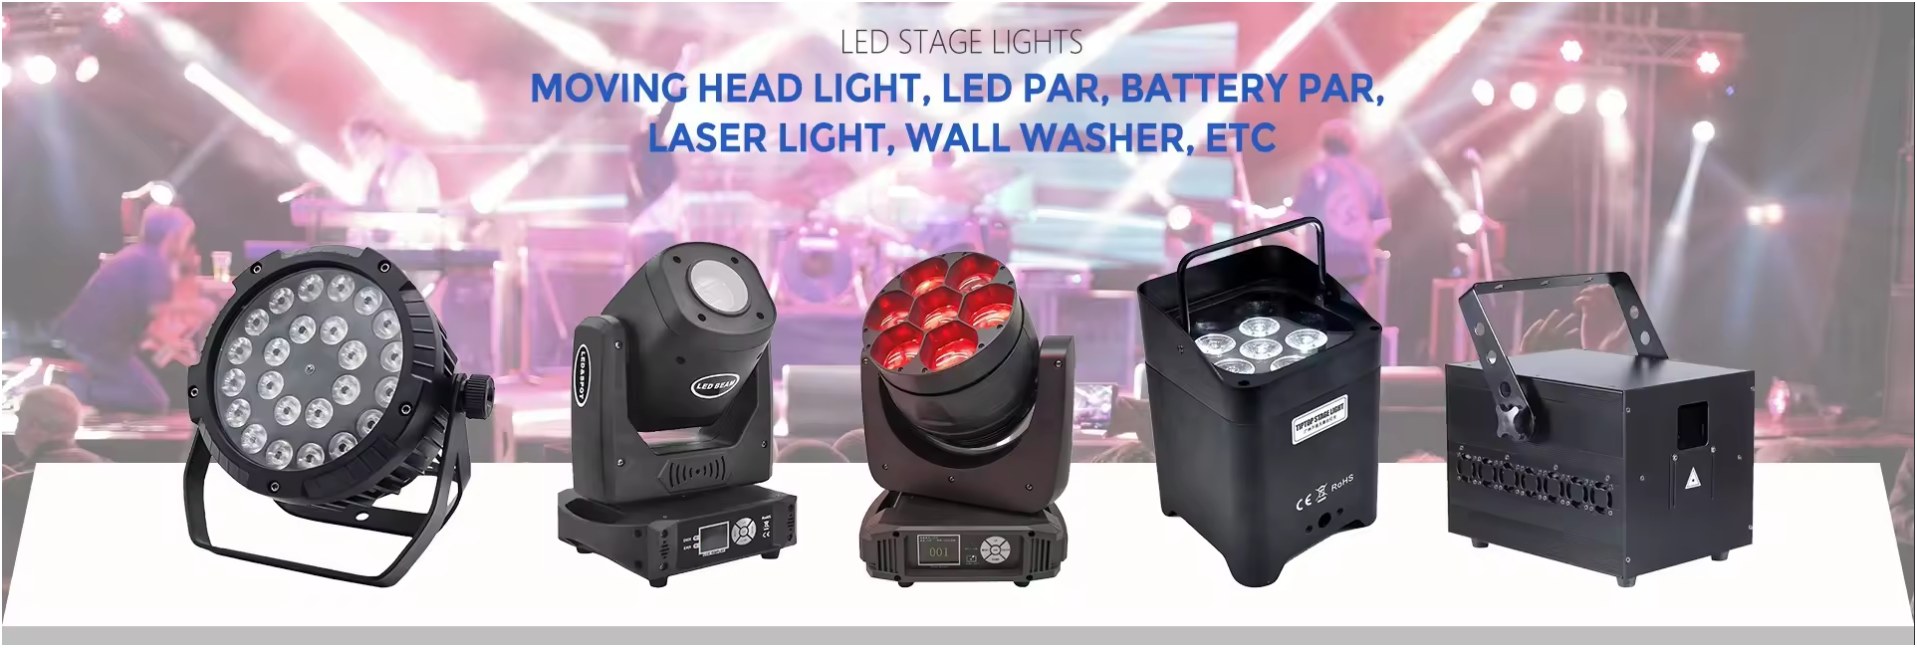 $Stage lighting_1$ $Lighting Design_2$ $Moving head_3$ $HazeMachine_4$Moving head_5$ $LED Square Base Bubble Machine SeriesFlame Light_6$ $LED 900/100 Fog Machine_7$ $LED Bubble Fog Machine_8$ $Water Low Fog Machine_9$ $Moving head Smoke Machine_10$ $Co2 Gun_11$ $Water Low Fog Machine-S12$ $_2000W Haze Machine_13$ $2600W Haze Machine_14$ $3000W Haze Machine_15$ $Water Low Fog Machine_16$ $Moving head Smoke Machine_17$ $Water Low Fog Machine-S_18$ $3/5 Head Firemachine_19$ $400W LED Fog machine_20$ $900W Fog Machine_21$ $3000W Fog Machine A_22$ $LED1200W Fog Machine_23$ $LED Confetti Machine_24$ $3/5 Head Firemachine_25$ $400W LED Fog machine_26$ $400W Fog Machine_27$ $900W Fog Machine_28$ $1200W/1500W Haze Machine_29$ $1200W/1500W Snow Machine-DMX_29$ $1200W/1500W Snow Machine_30$ $1200W Fog Machine_31$ $1500W Haze Machine _32$ $1500W Fog Machine_33$ $3000W haze Machine_34$ $3000W Fog Machine A_35$ $3000W Fog Machine B_36$ $LED oval base flame light_37$ $5000W Supper lowFog Machine_38$ $Water Low Fog Machine-S$_39$ $2Head Water Low Fog Machine_40$ $Low Lying Fog Machine_41$ $3000W 4000W 6000W dry-ice Machine_42$ $Small dry-ice Machine_43$ $Pro Haze Machine Series_44$ $Fog Machine Series_45$ $Droplet Hood_46$ $Dry lce Mchine Series_47$ $Confetti Machine Series_48$ $Flame Machine Series _49$ $Supplies Products Series _50$ $Water Mist Machine Series